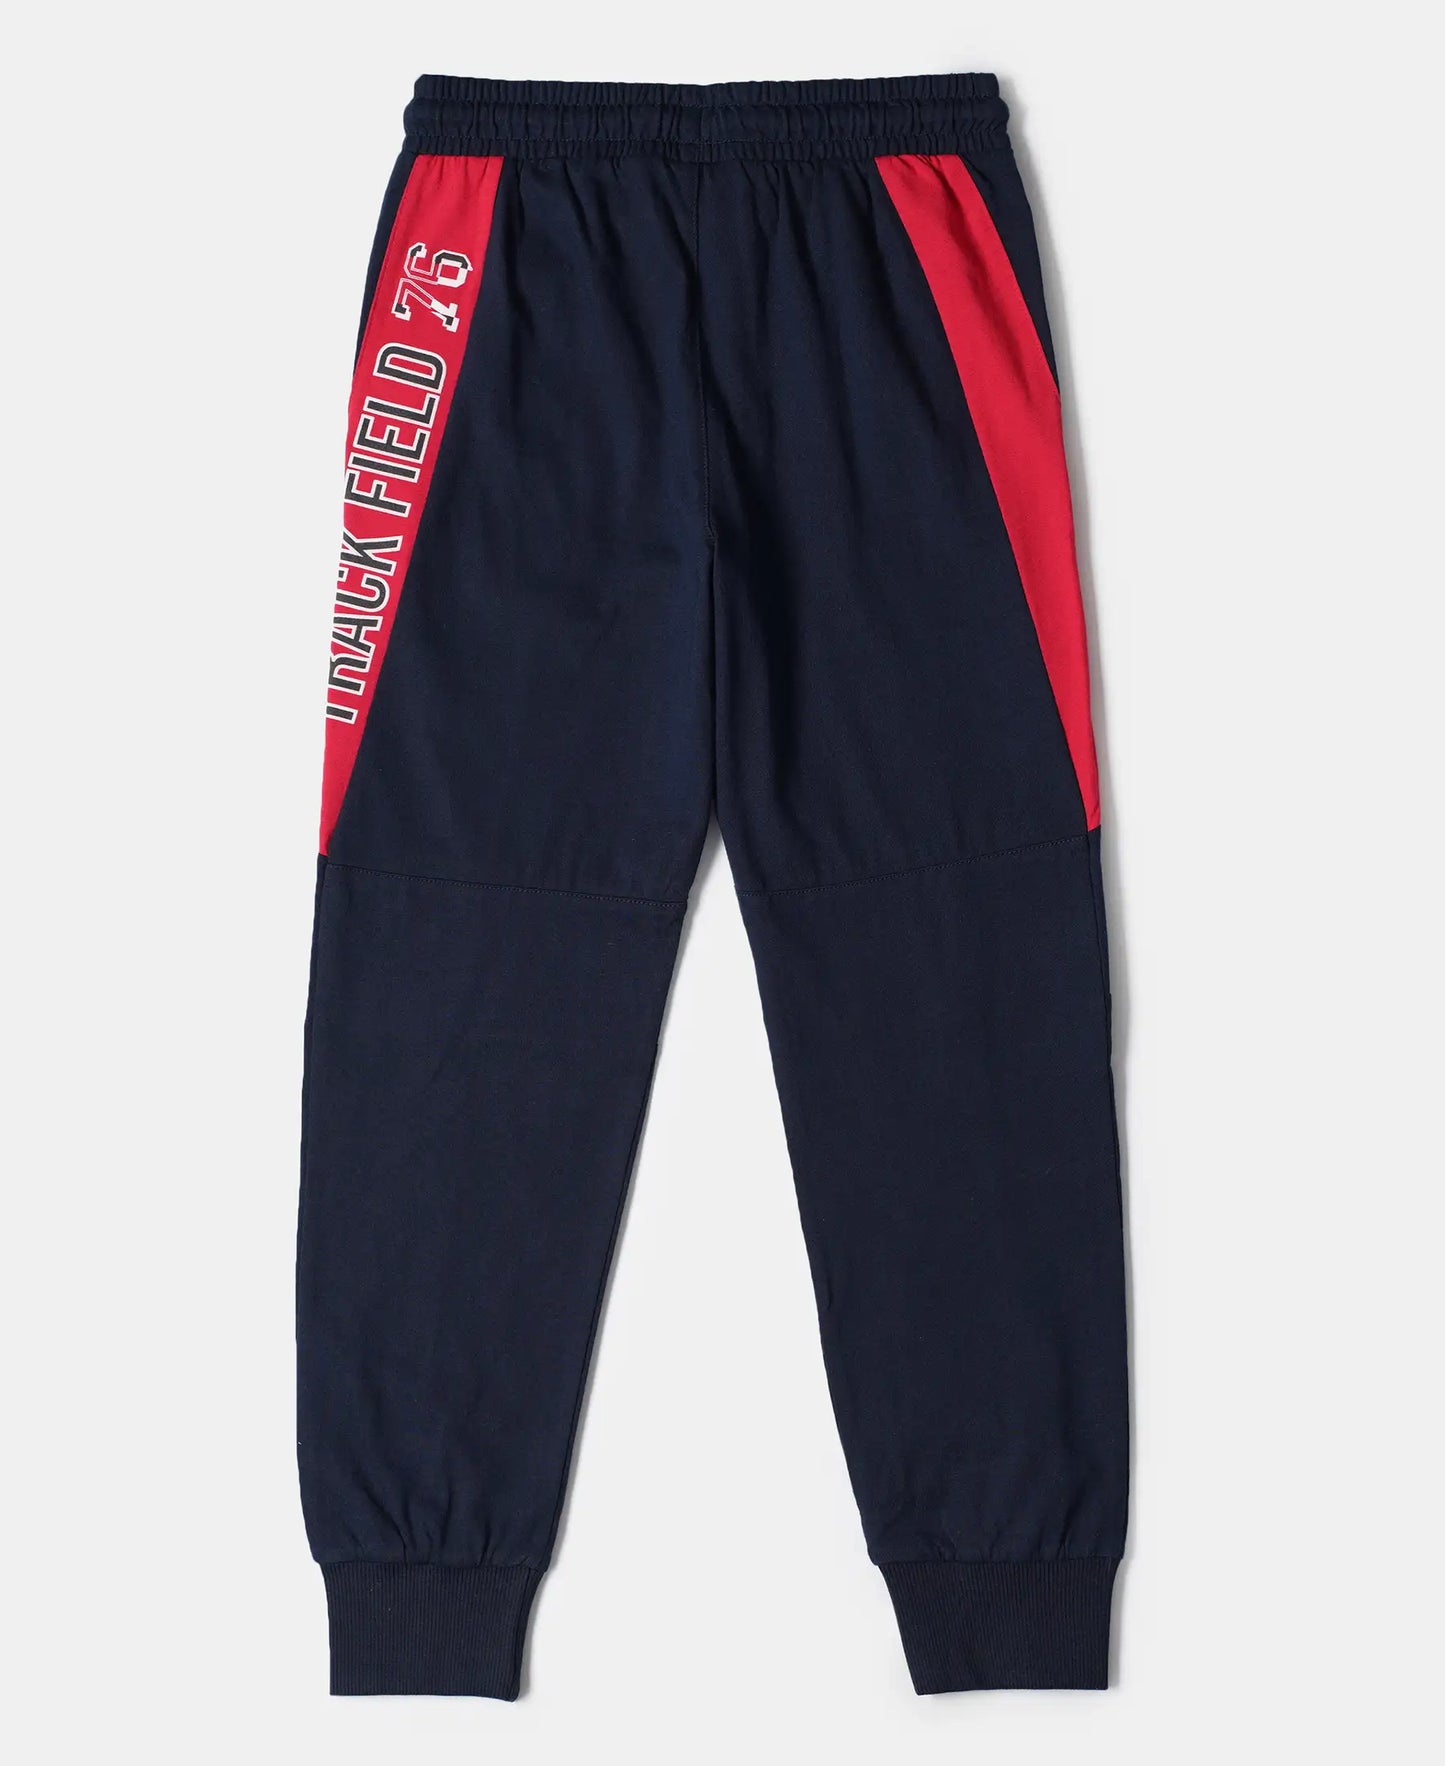 Super Combed Cotton Rich Graphic Printed Joggers with Ribbed Cuff Hem - Navy & Team Red-2